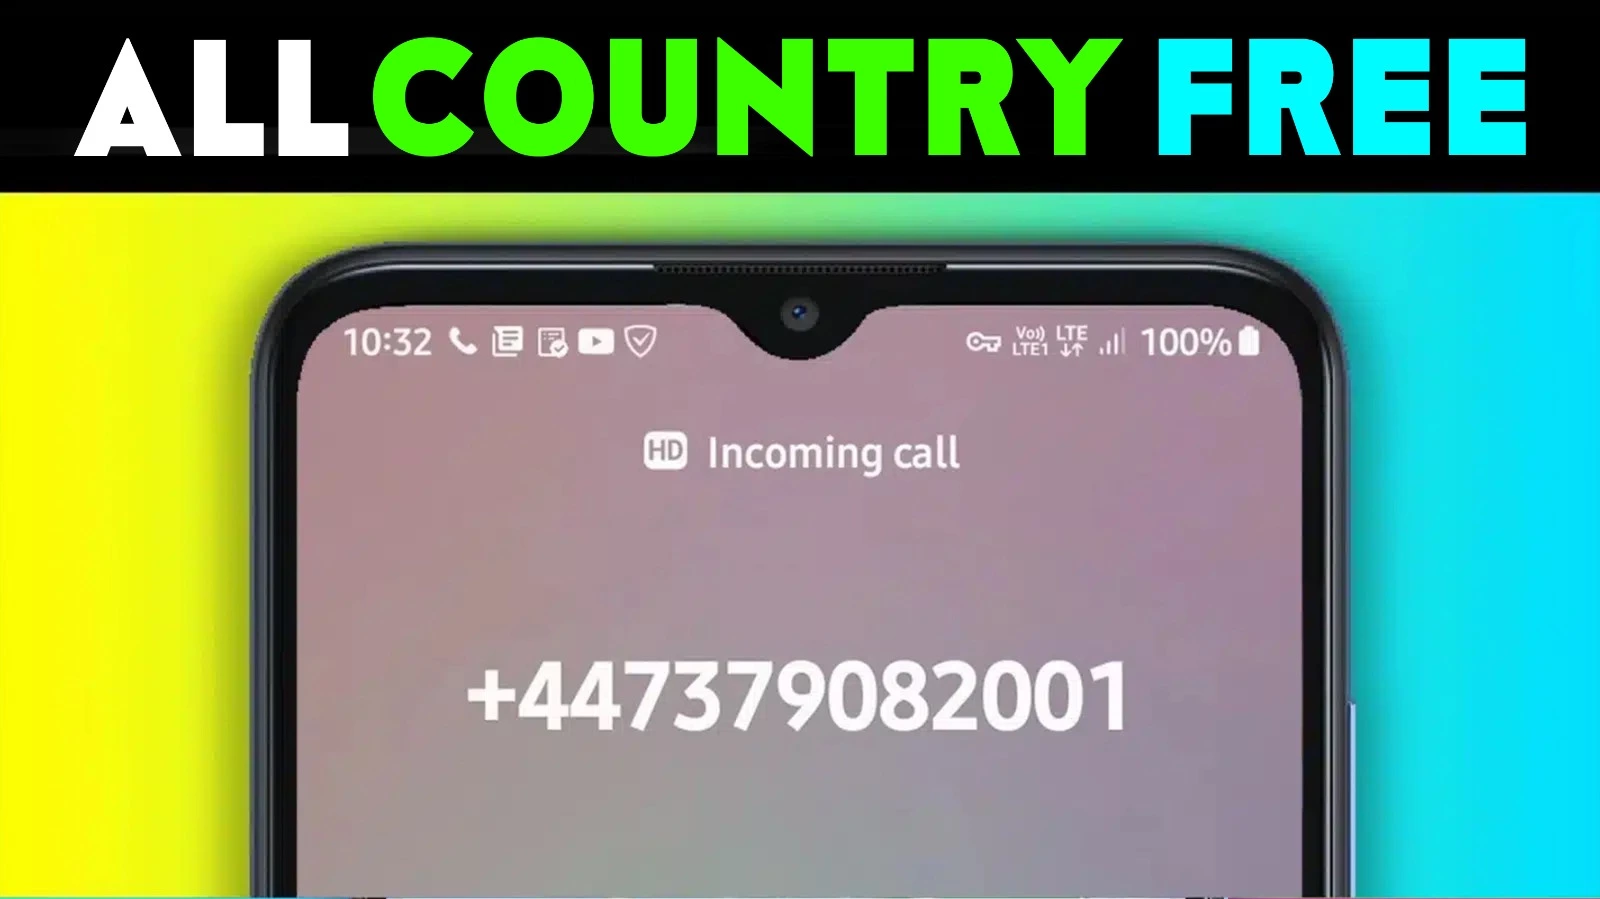 All Country Free Calling App